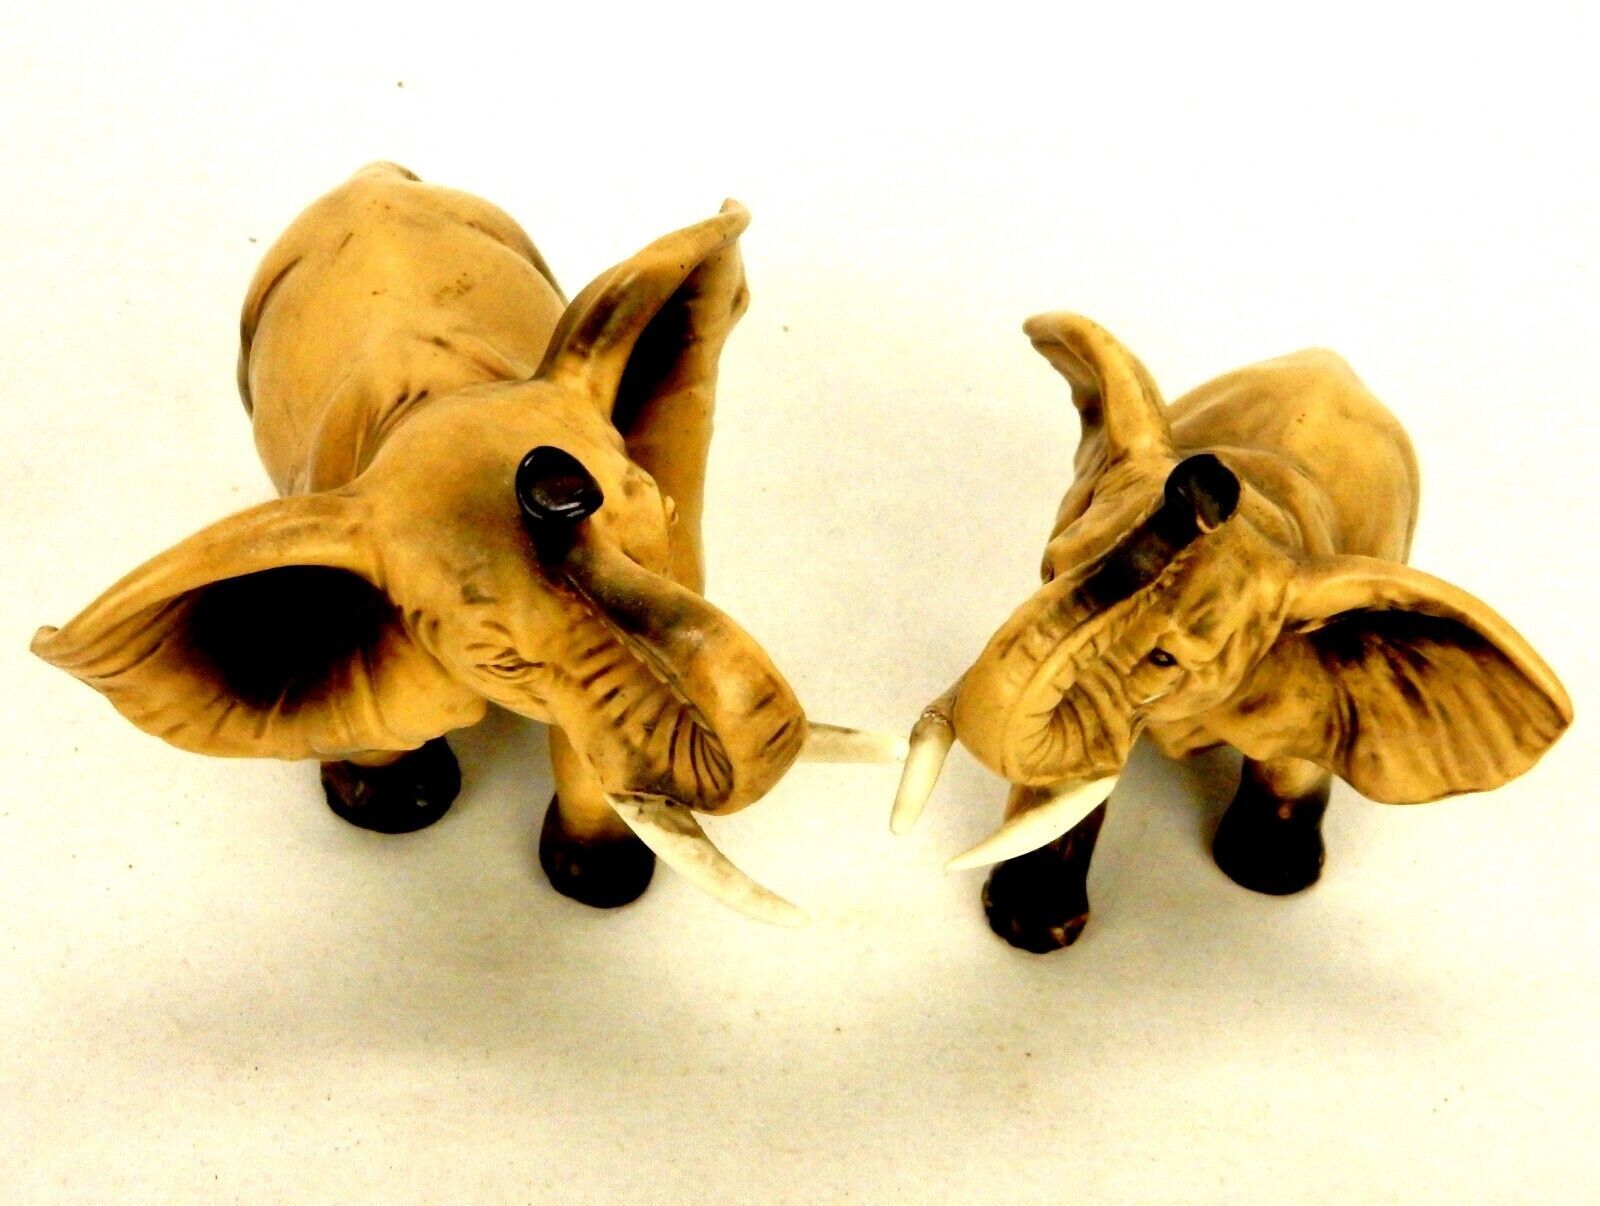 Pair of Lefton Porcelain Figurines, Trunks Up, H2674 (small) & H2675 (large) - $48.95